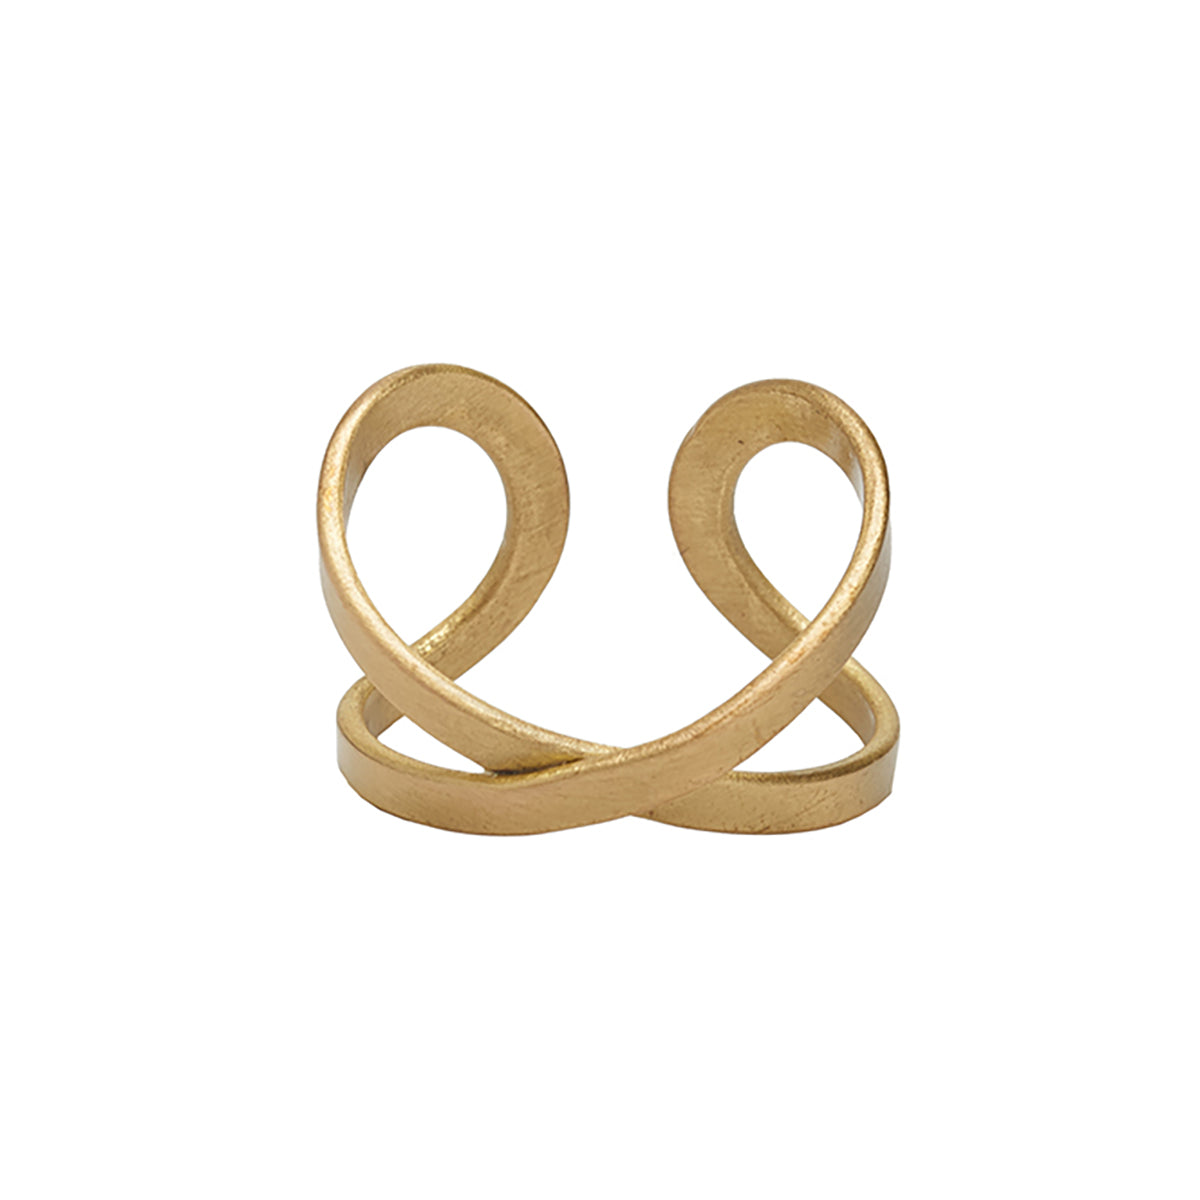 Angelco Accessories Infinity ring - gold